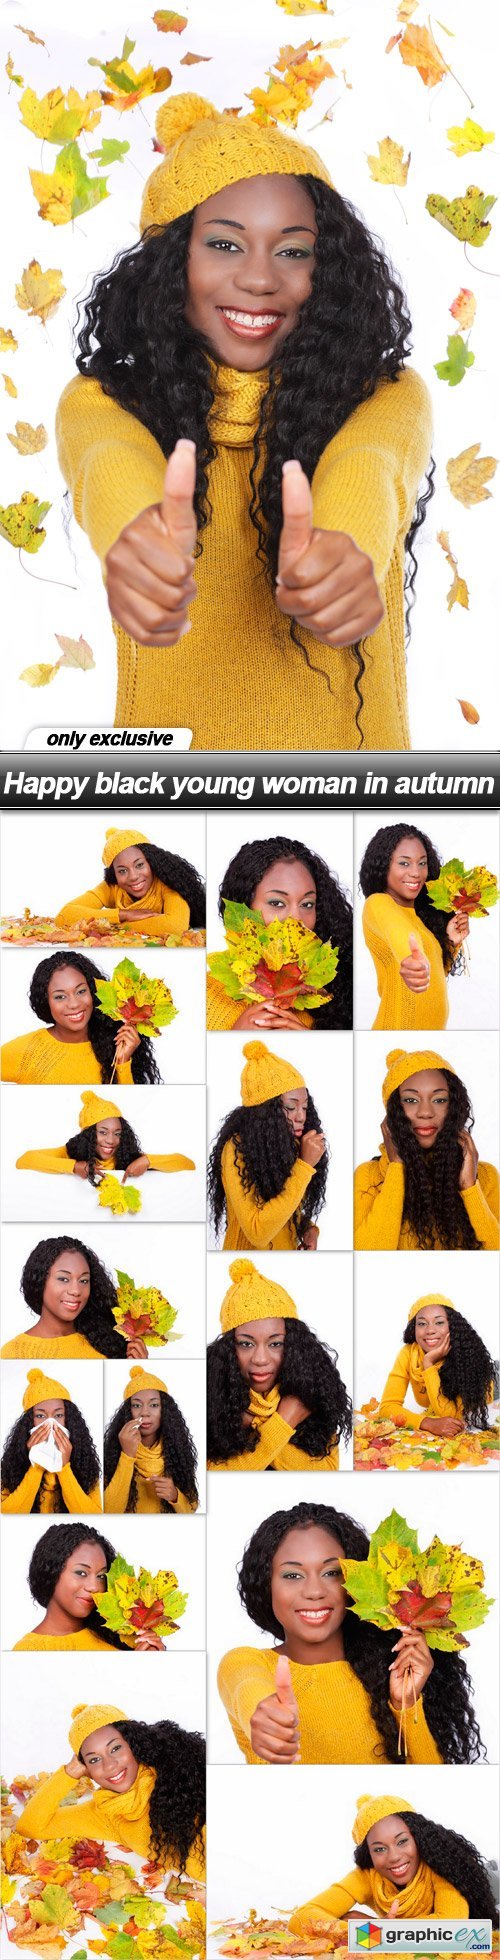 Happy black young woman in autumn - 17 UHQ JPEG